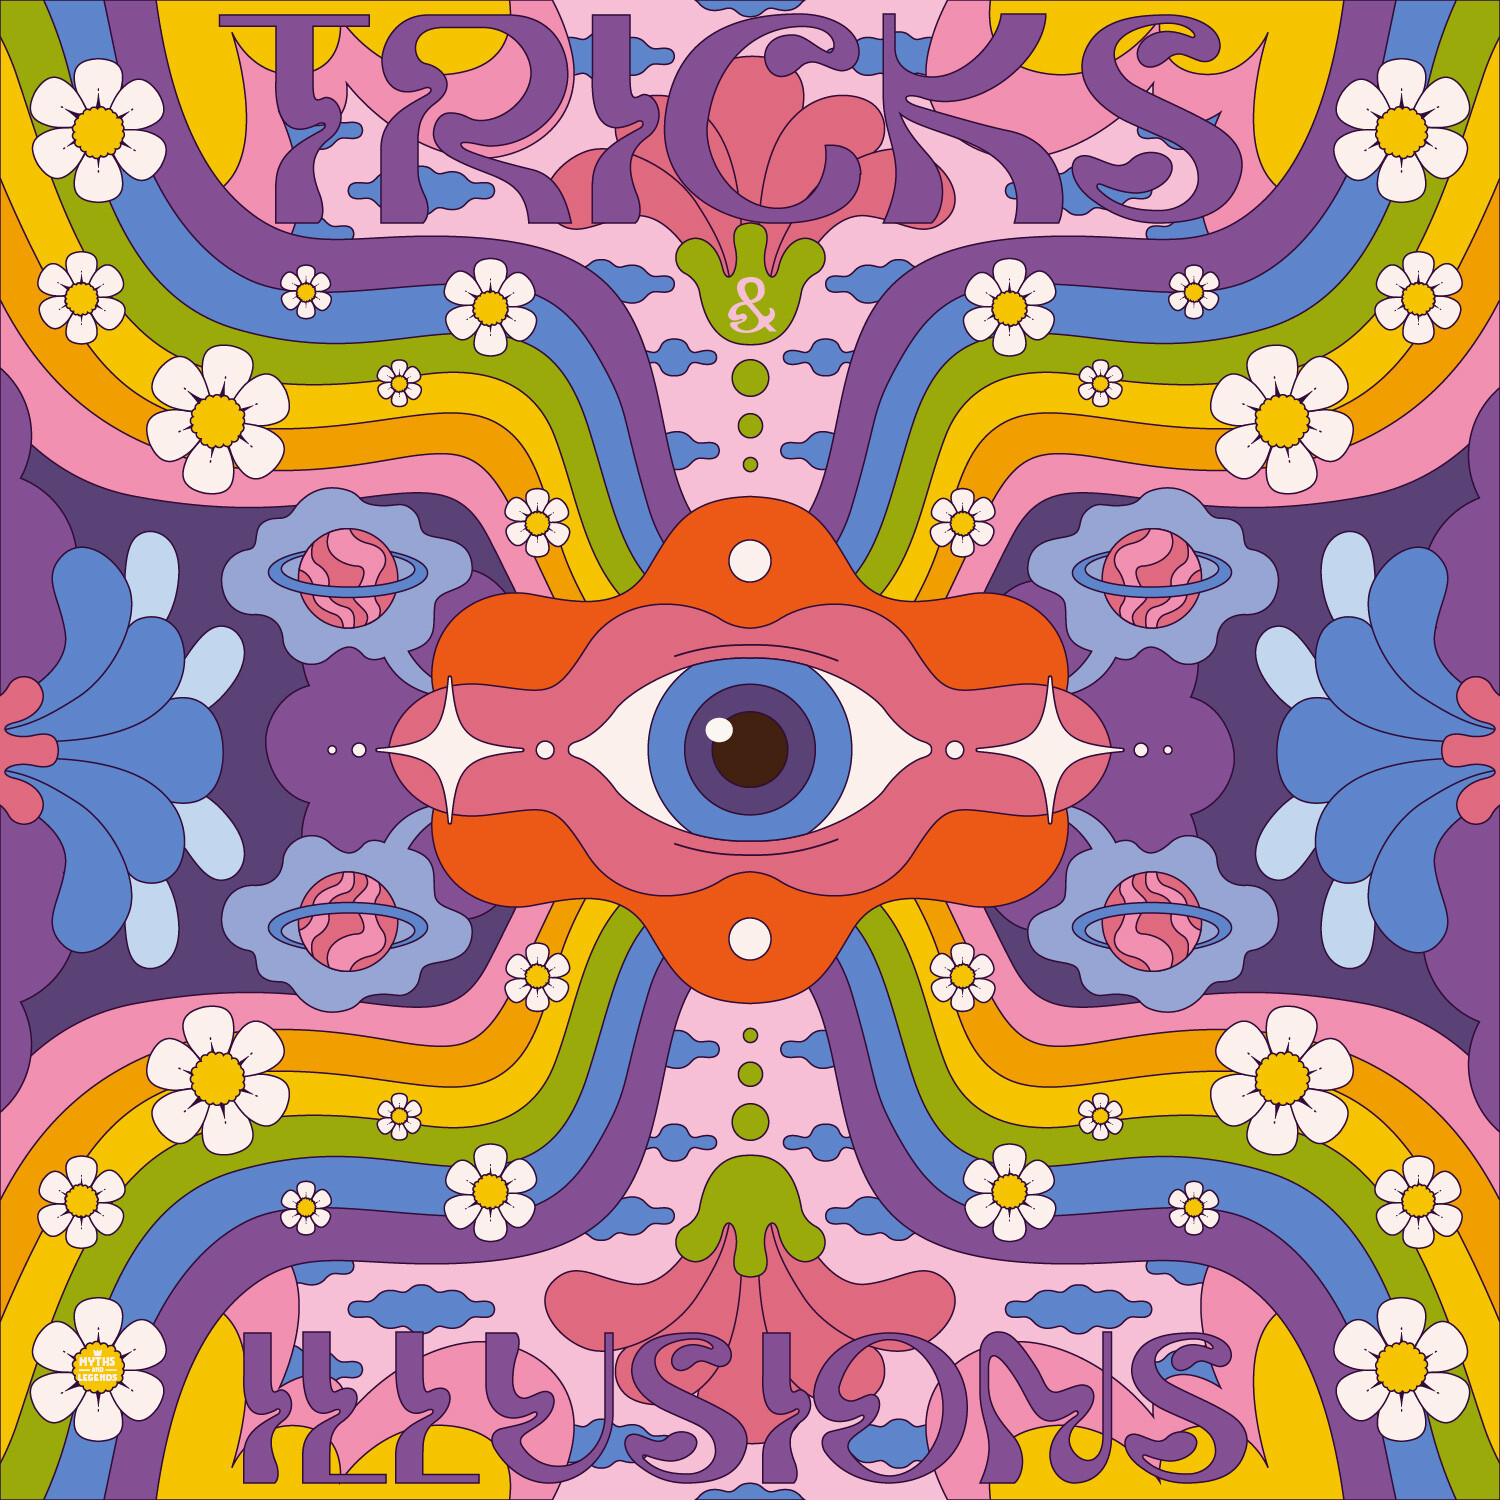 A trippy image with an eye in the middle, surrounded by symmetrical flowers, planets, and rainbows. The words "Tricks & Illustions" are part of the show art for Myths and Legends episode 319.